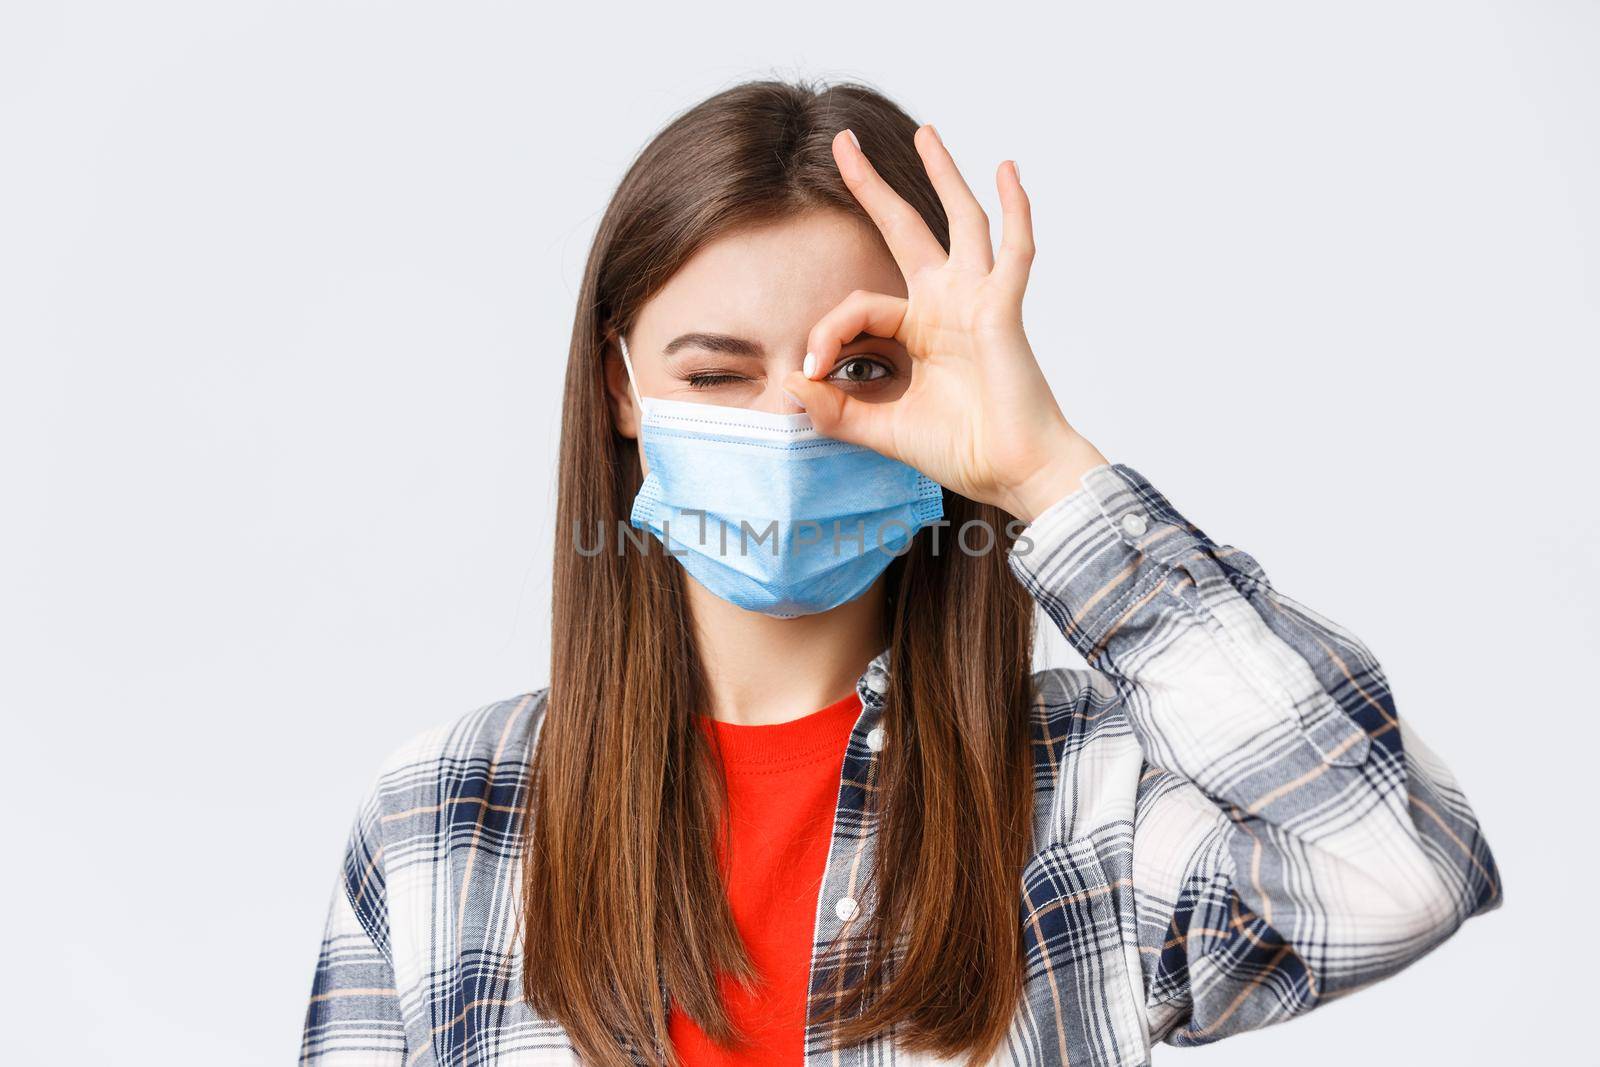 Coronavirus outbreak, leisure on quarantine, social distancing and emotions concept. Close-up of optimistic good-looking woman in medical mask show okay sign and wink.